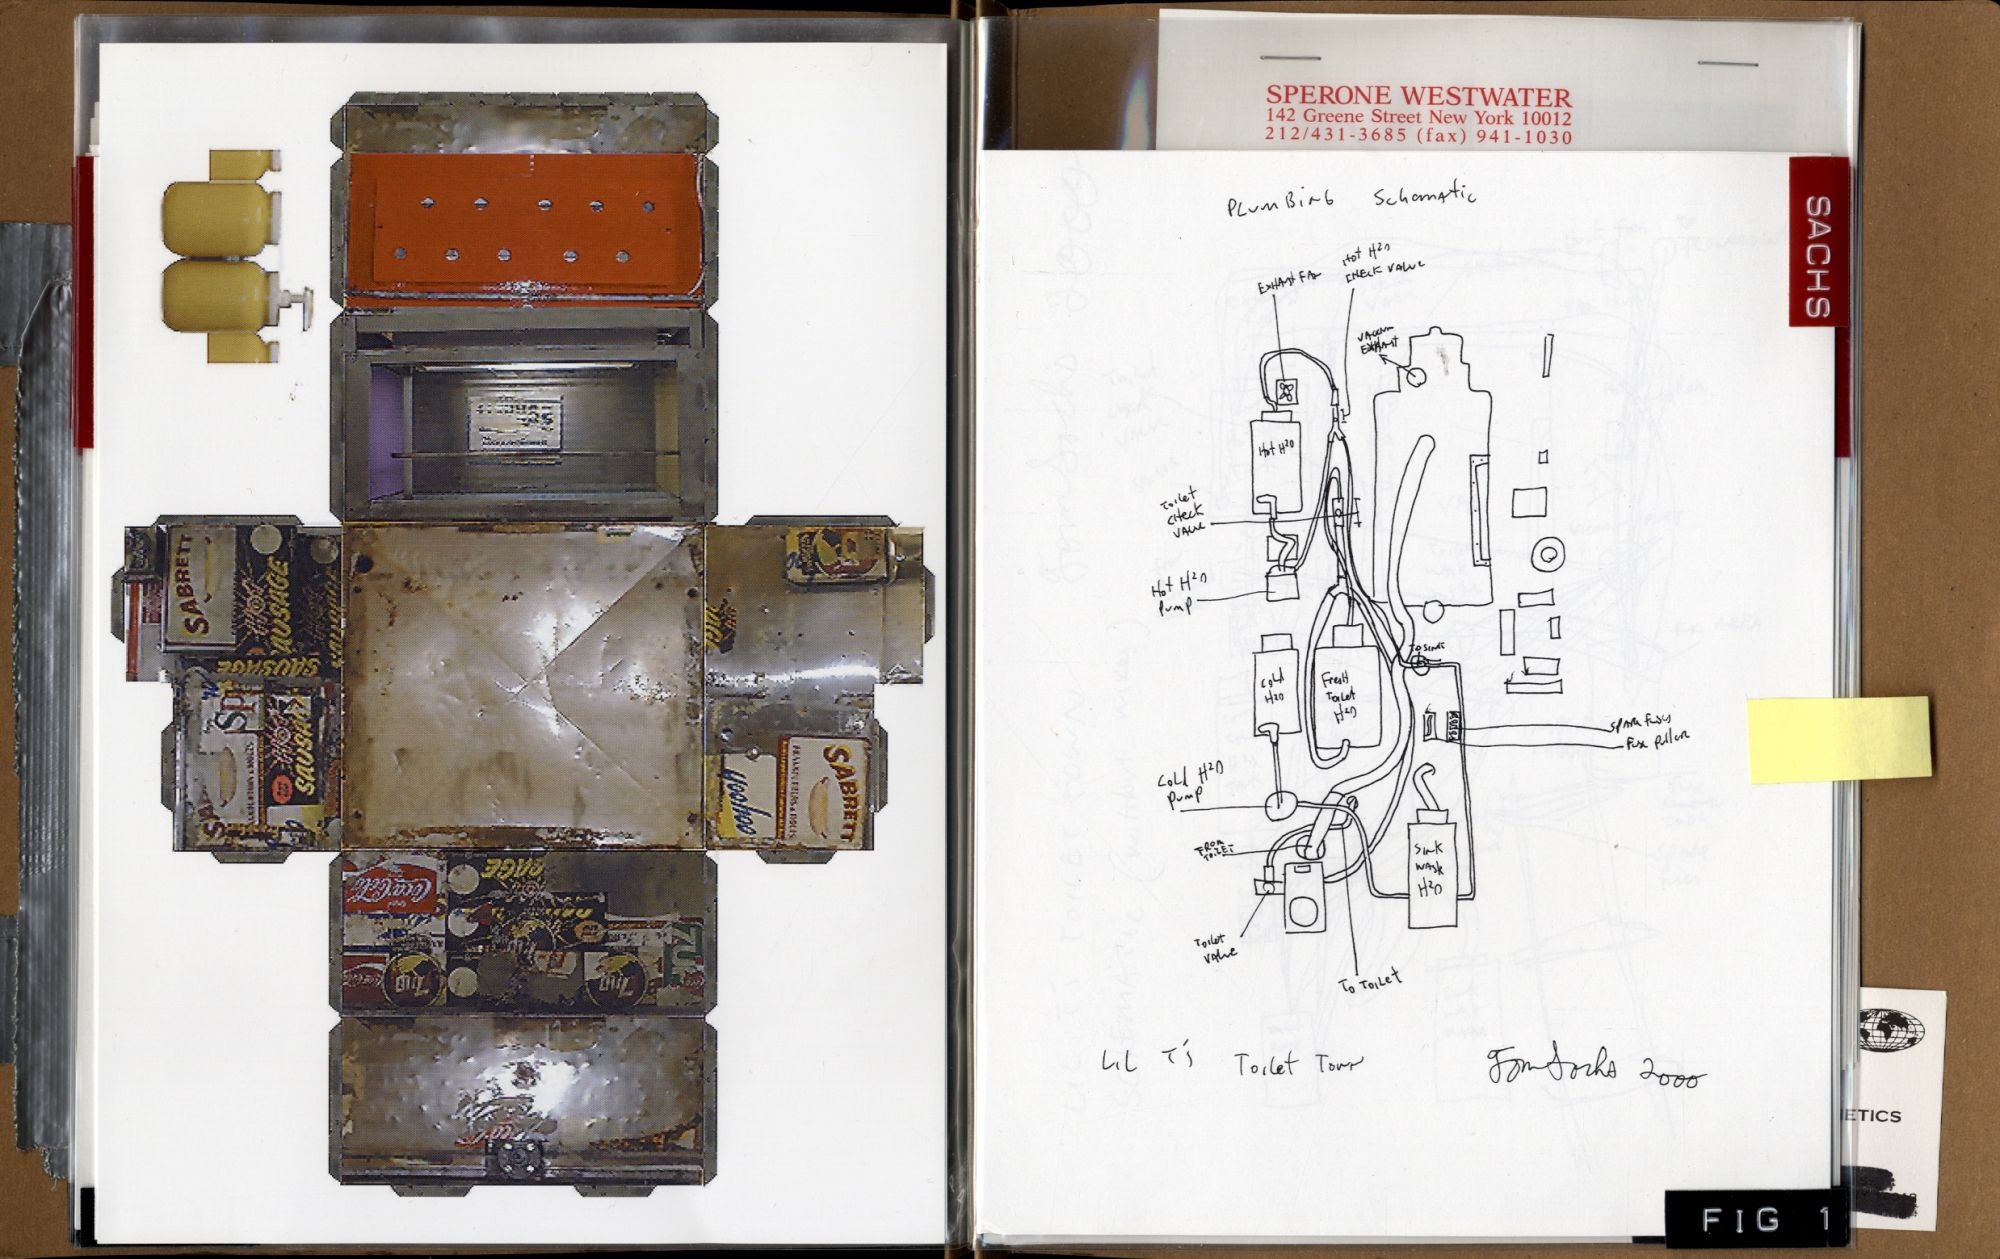 American Bricolage, Limited Edition [SIGNED by Tom Sachs, Todd Alden and Wim Delvoye]